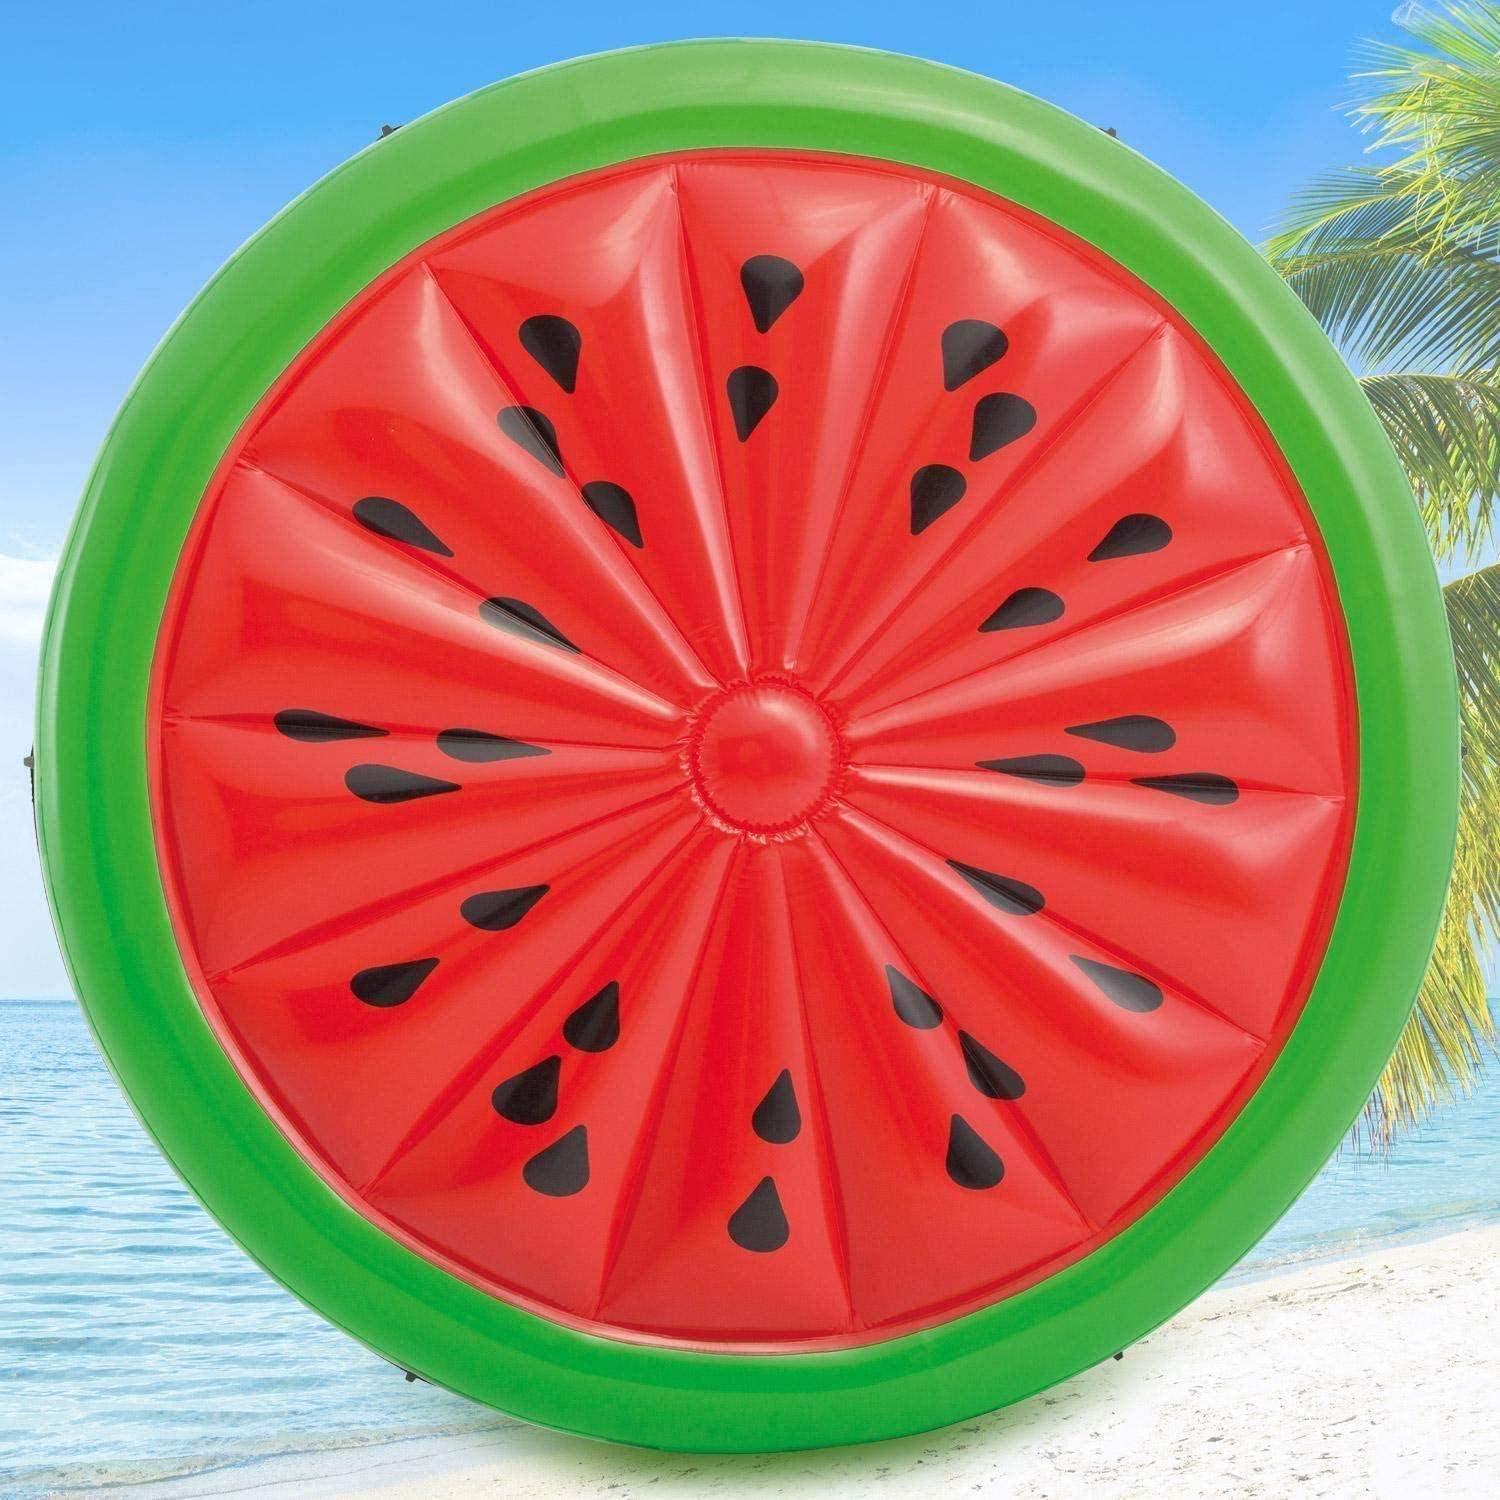 Intex Inflatable Watermelon Lounger by Intex - The Magic Toy Shop